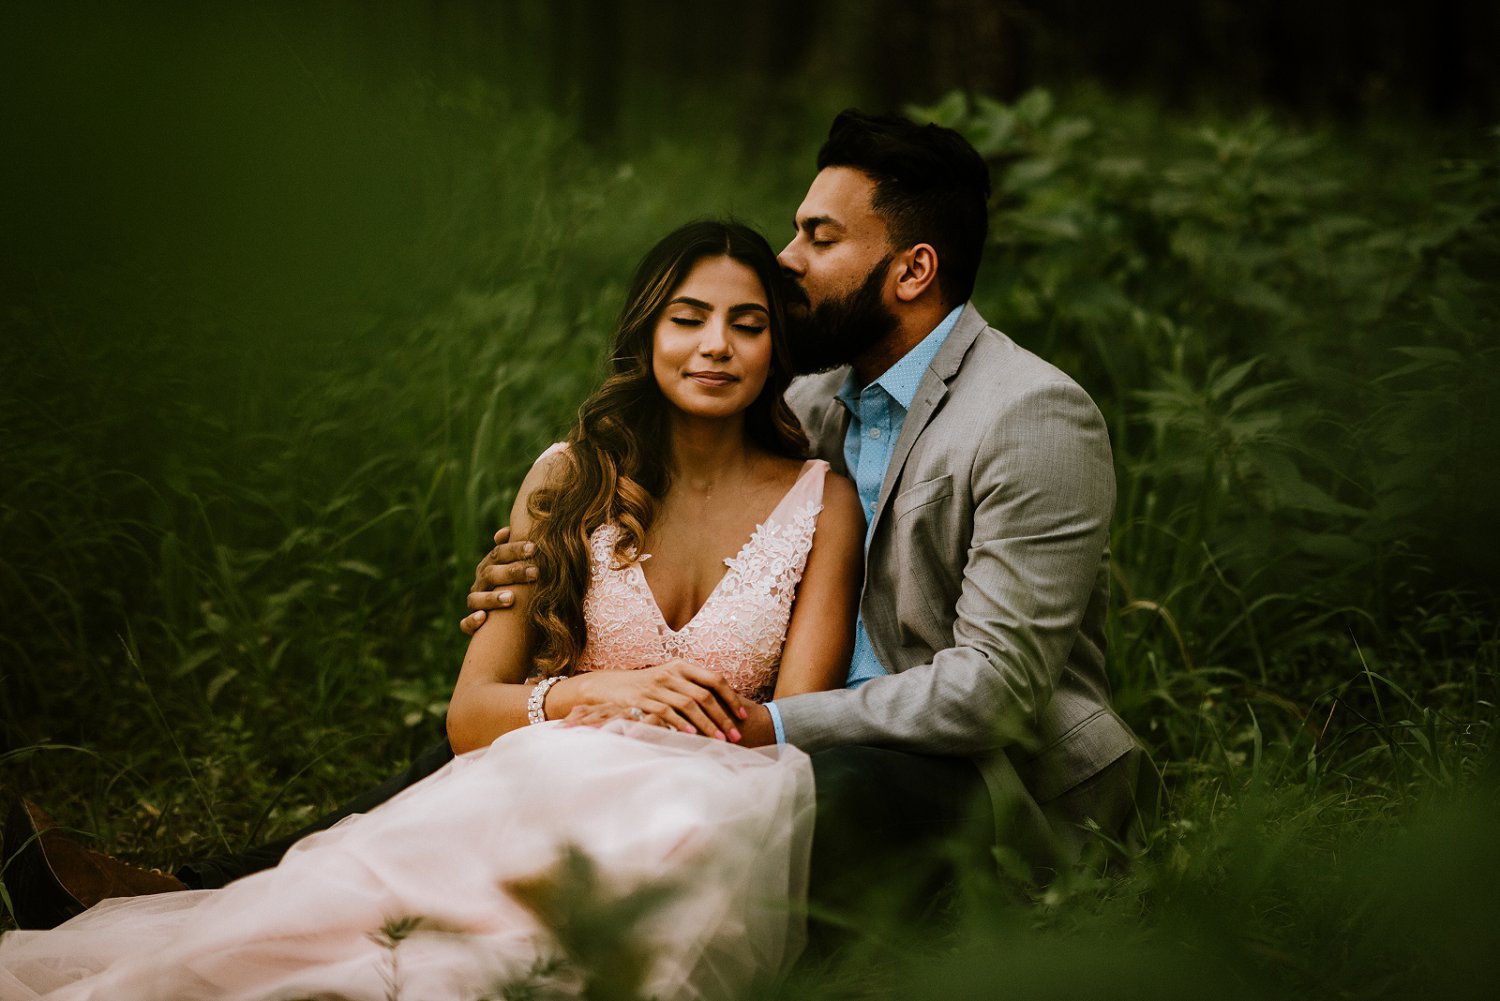 the woodlands forest engagement session